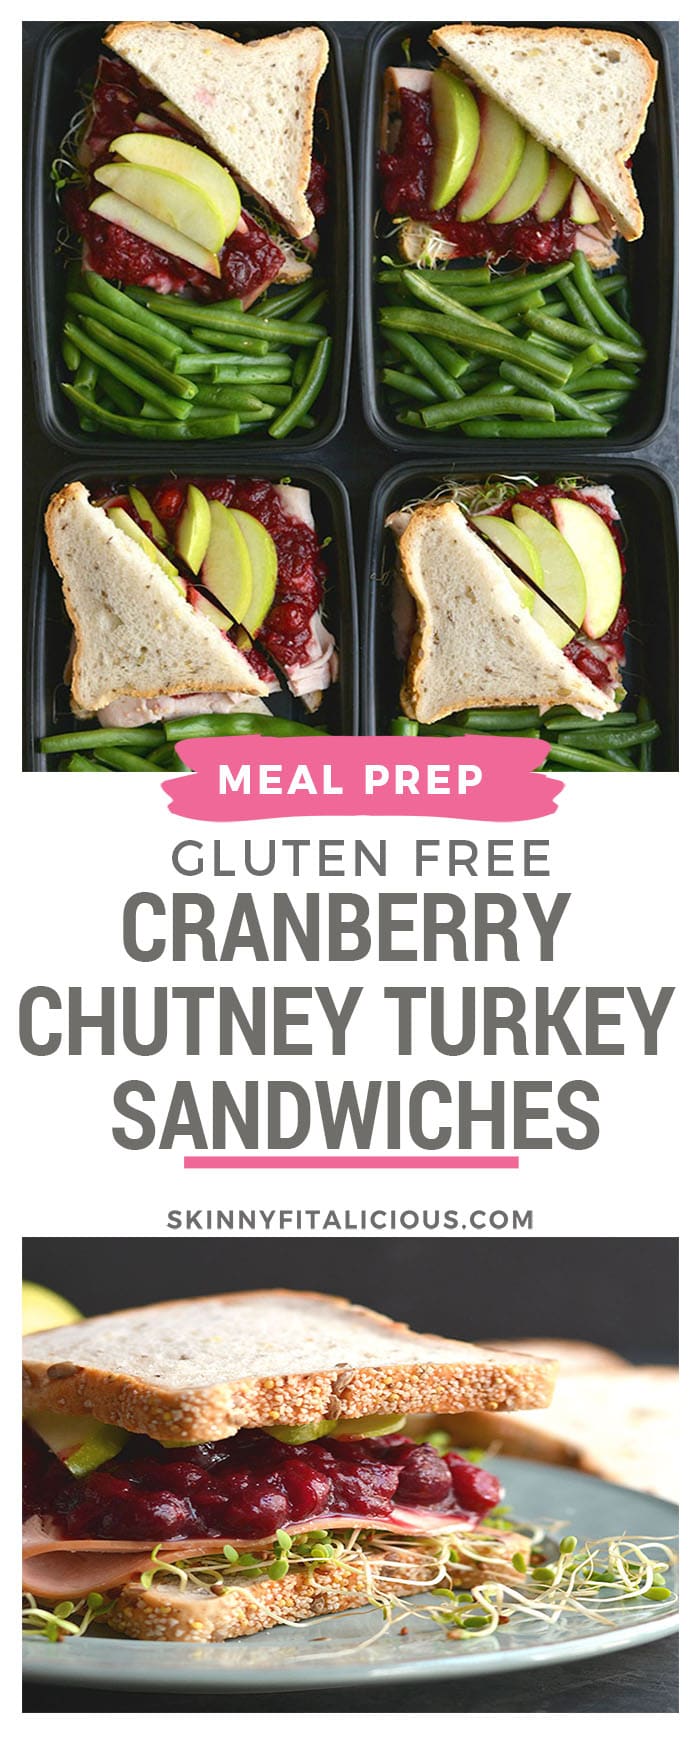 Meal Prep Cranberry Turkey Sandwich! Transform Thanksgiving leftovers into a simple, delicious & wholesome lunch. EASY to meal prep, but even better to take with you on the go & eat! Gluten Free + Low Calorie